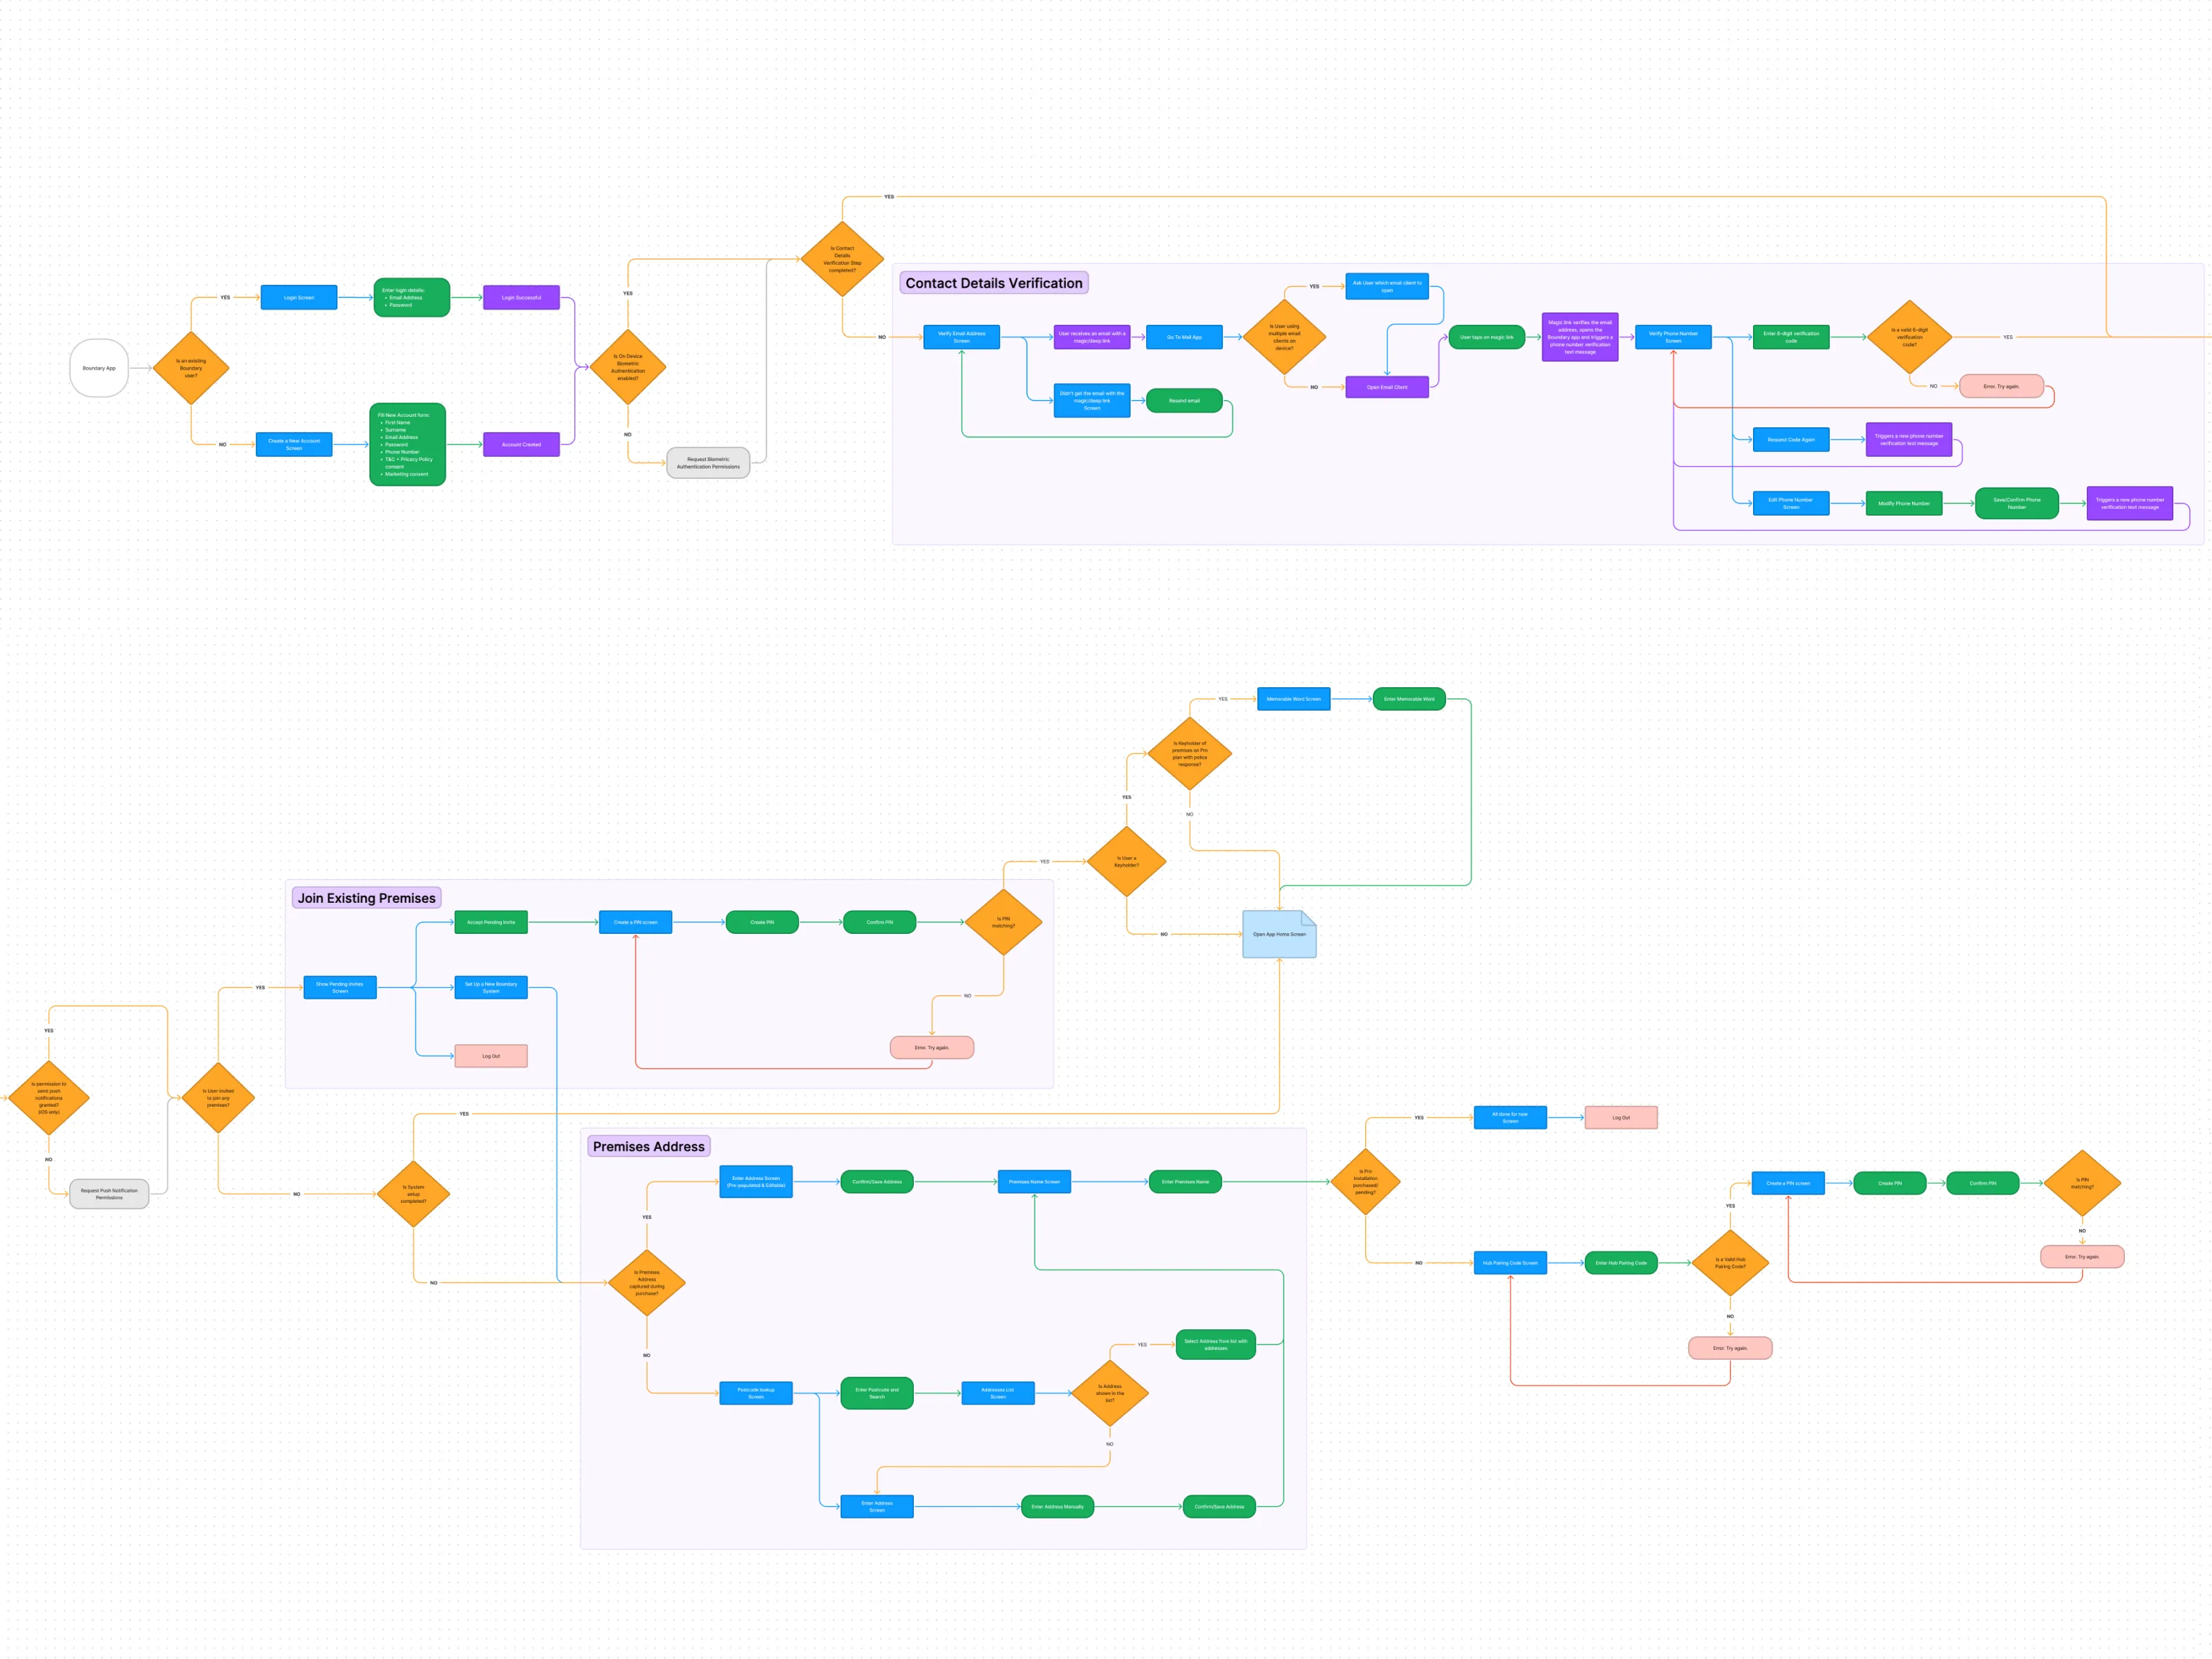 Visual representation of a user flow diagram for an onboarding process within an app. The flowchart contains various decision points, actions, and outcomes, organized into different colored blocks, such as orange diamonds for decision points, blue rectangles for user actions, and green rounded rectangles for system responses. Labels like 'Join Existing Premises,' 'Contact Details Verification,' and 'Premises Address' indicate different stages in the process. Arrows connect the blocks, indicating the flow of the user's journey from start to finish. The background is white, and the overall layout is designed to map out the logic and sequence of user interactions for app developers and designers.